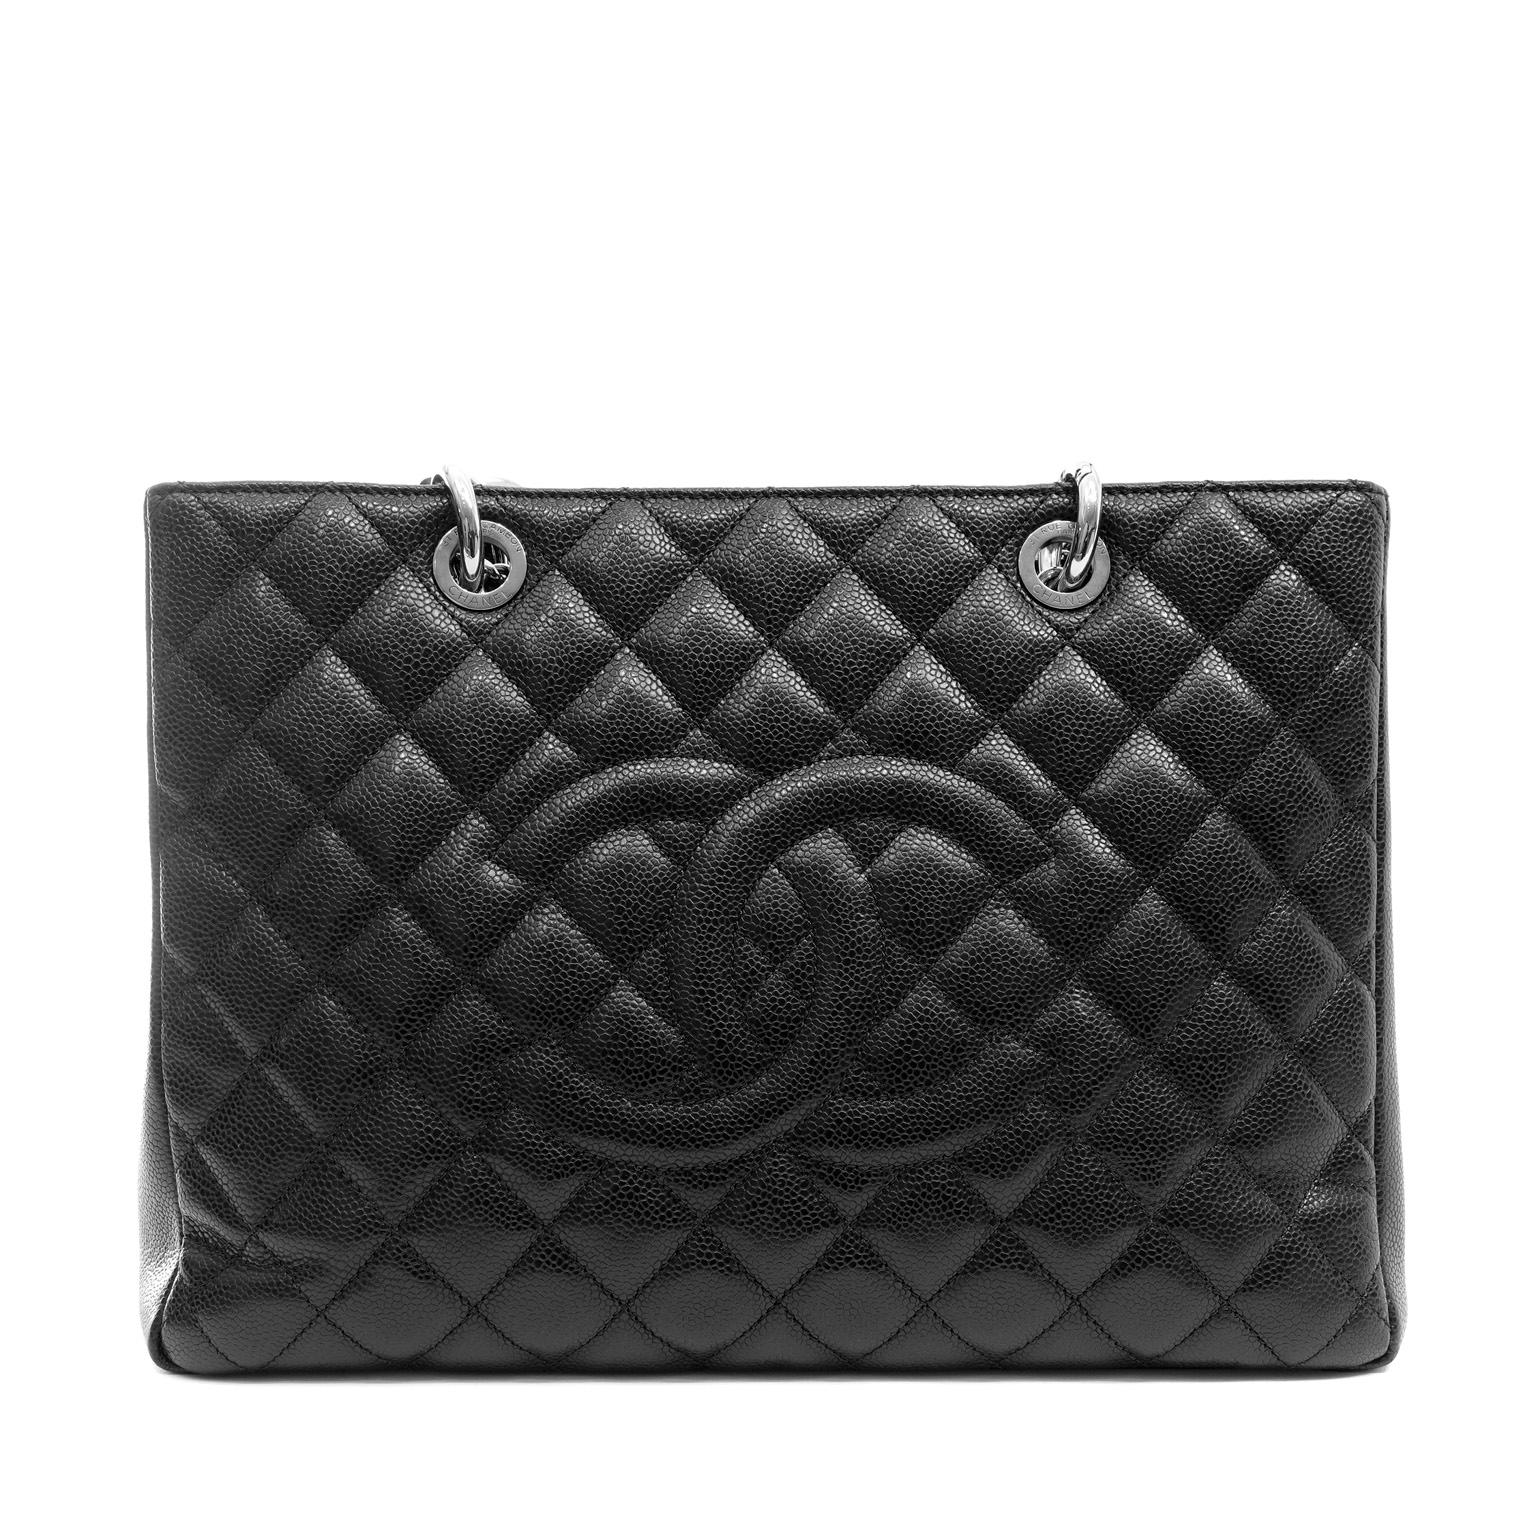 This authentic Chanel Black Caviar GST is in pristine condition. Part of the Timeless Classics collection, the Grand Shopping Tote, or GST, is a go anywhere year-round piece. 

Durable textured black caviar leather is quilted in signature Chanel